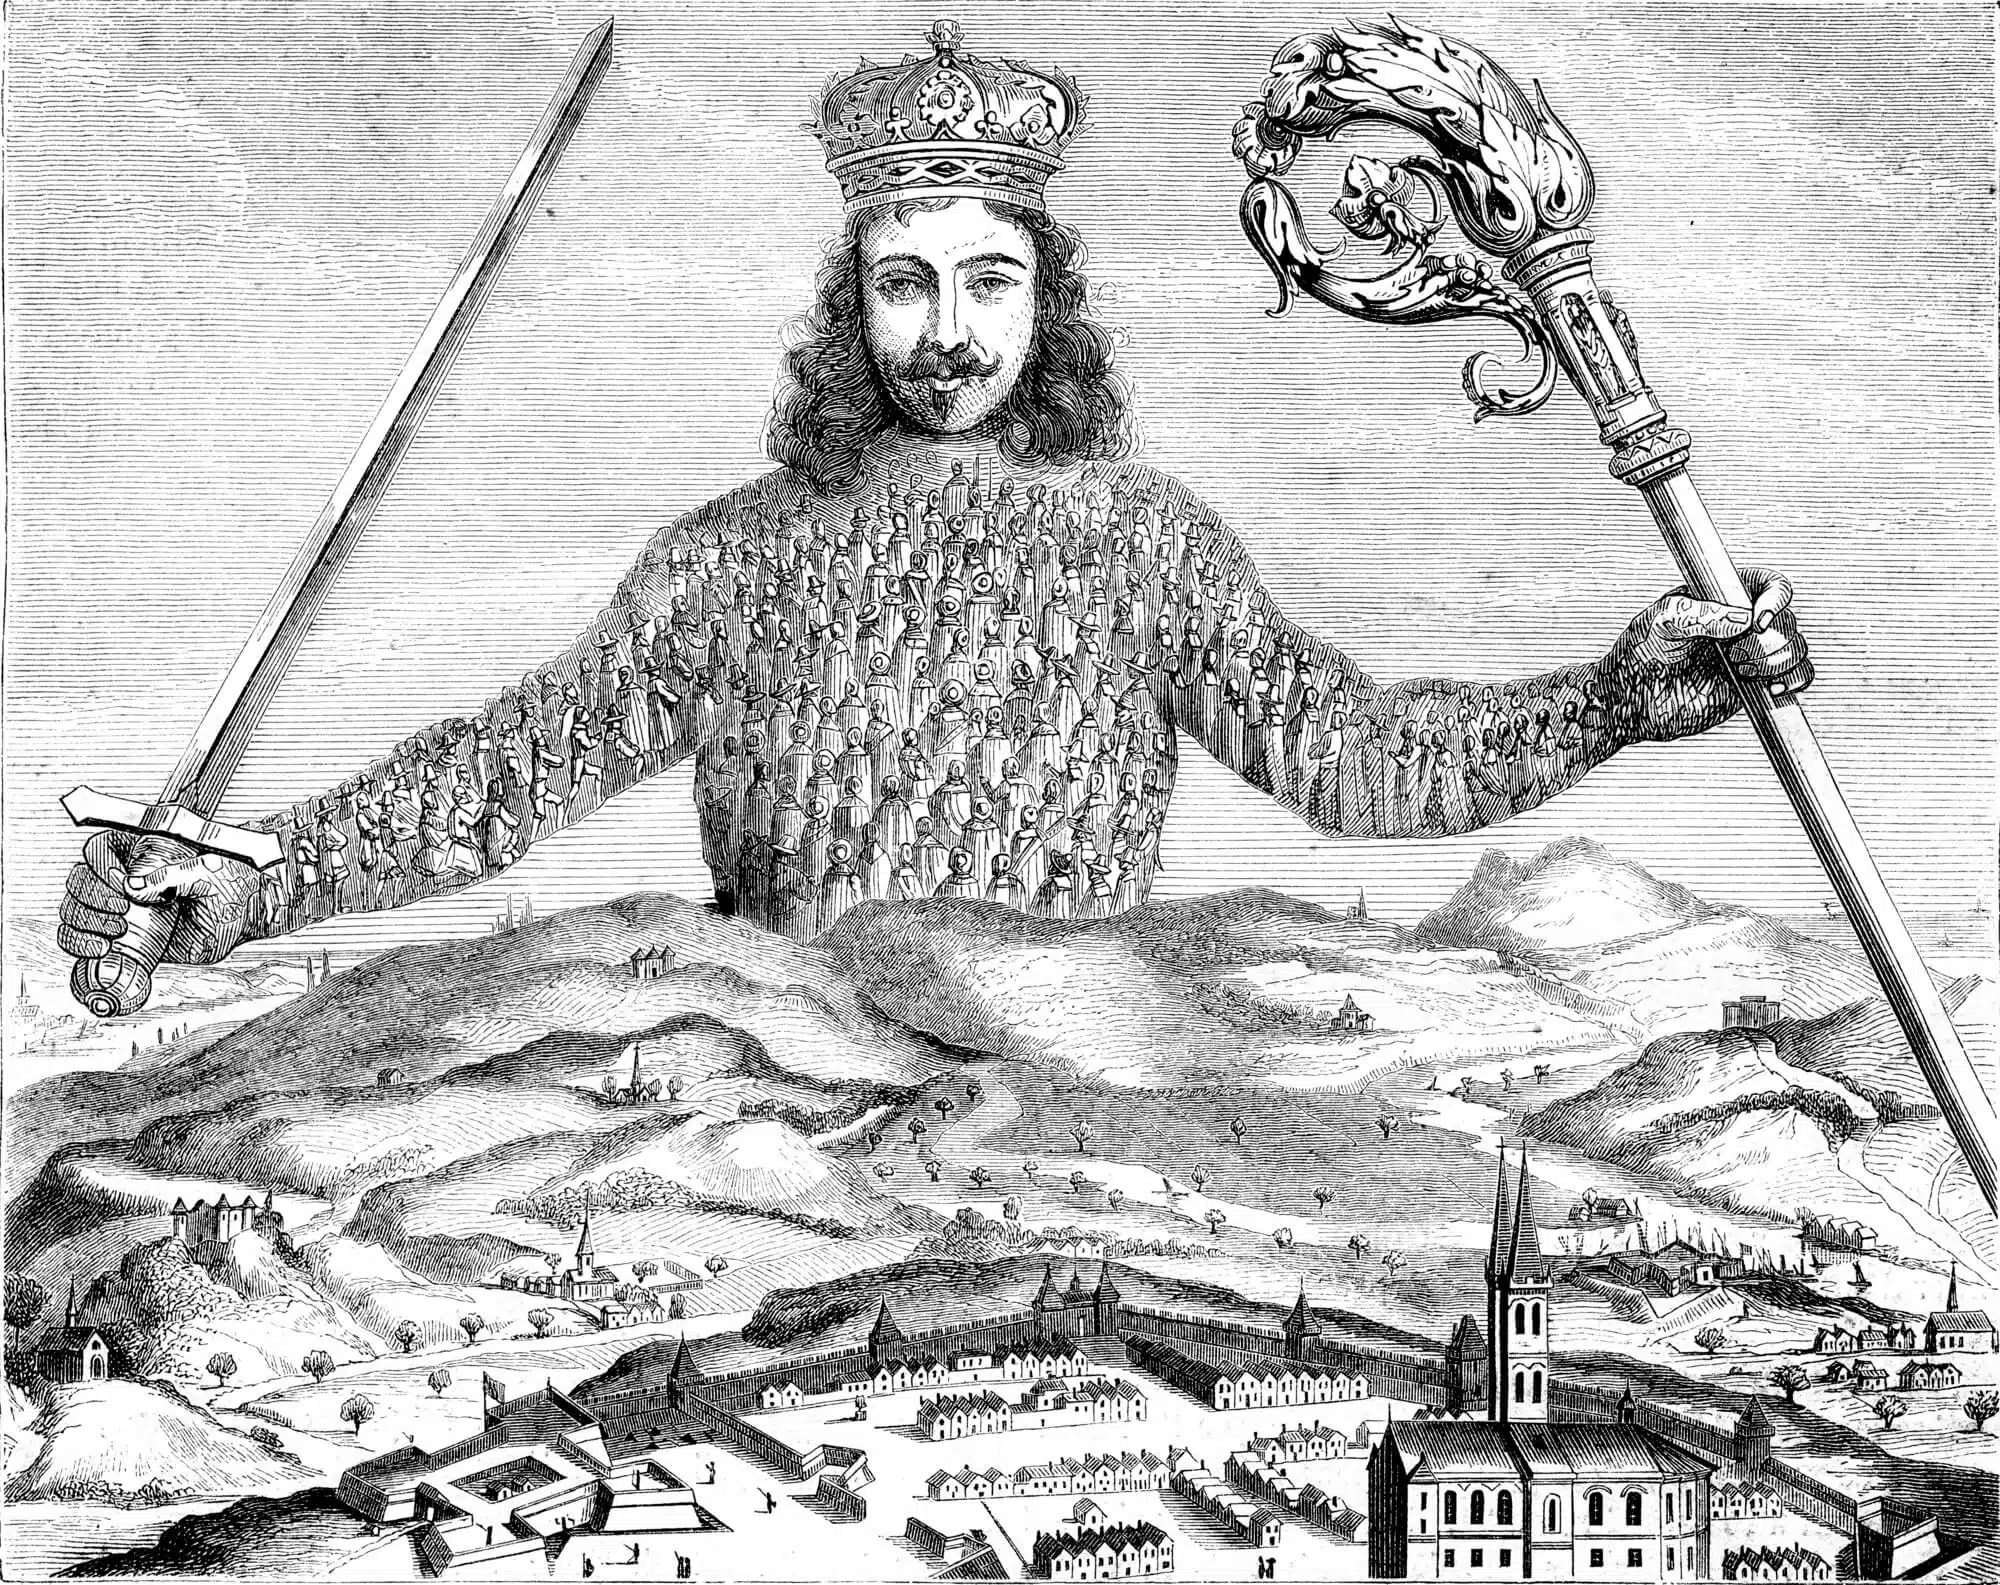 The absolute ruler - an illustration made by Abraham Bosse for the cover of the book "Leviathan" by Thomas Hobbes, at the request of Hobbes, 17th century. Image: depositphotos.com